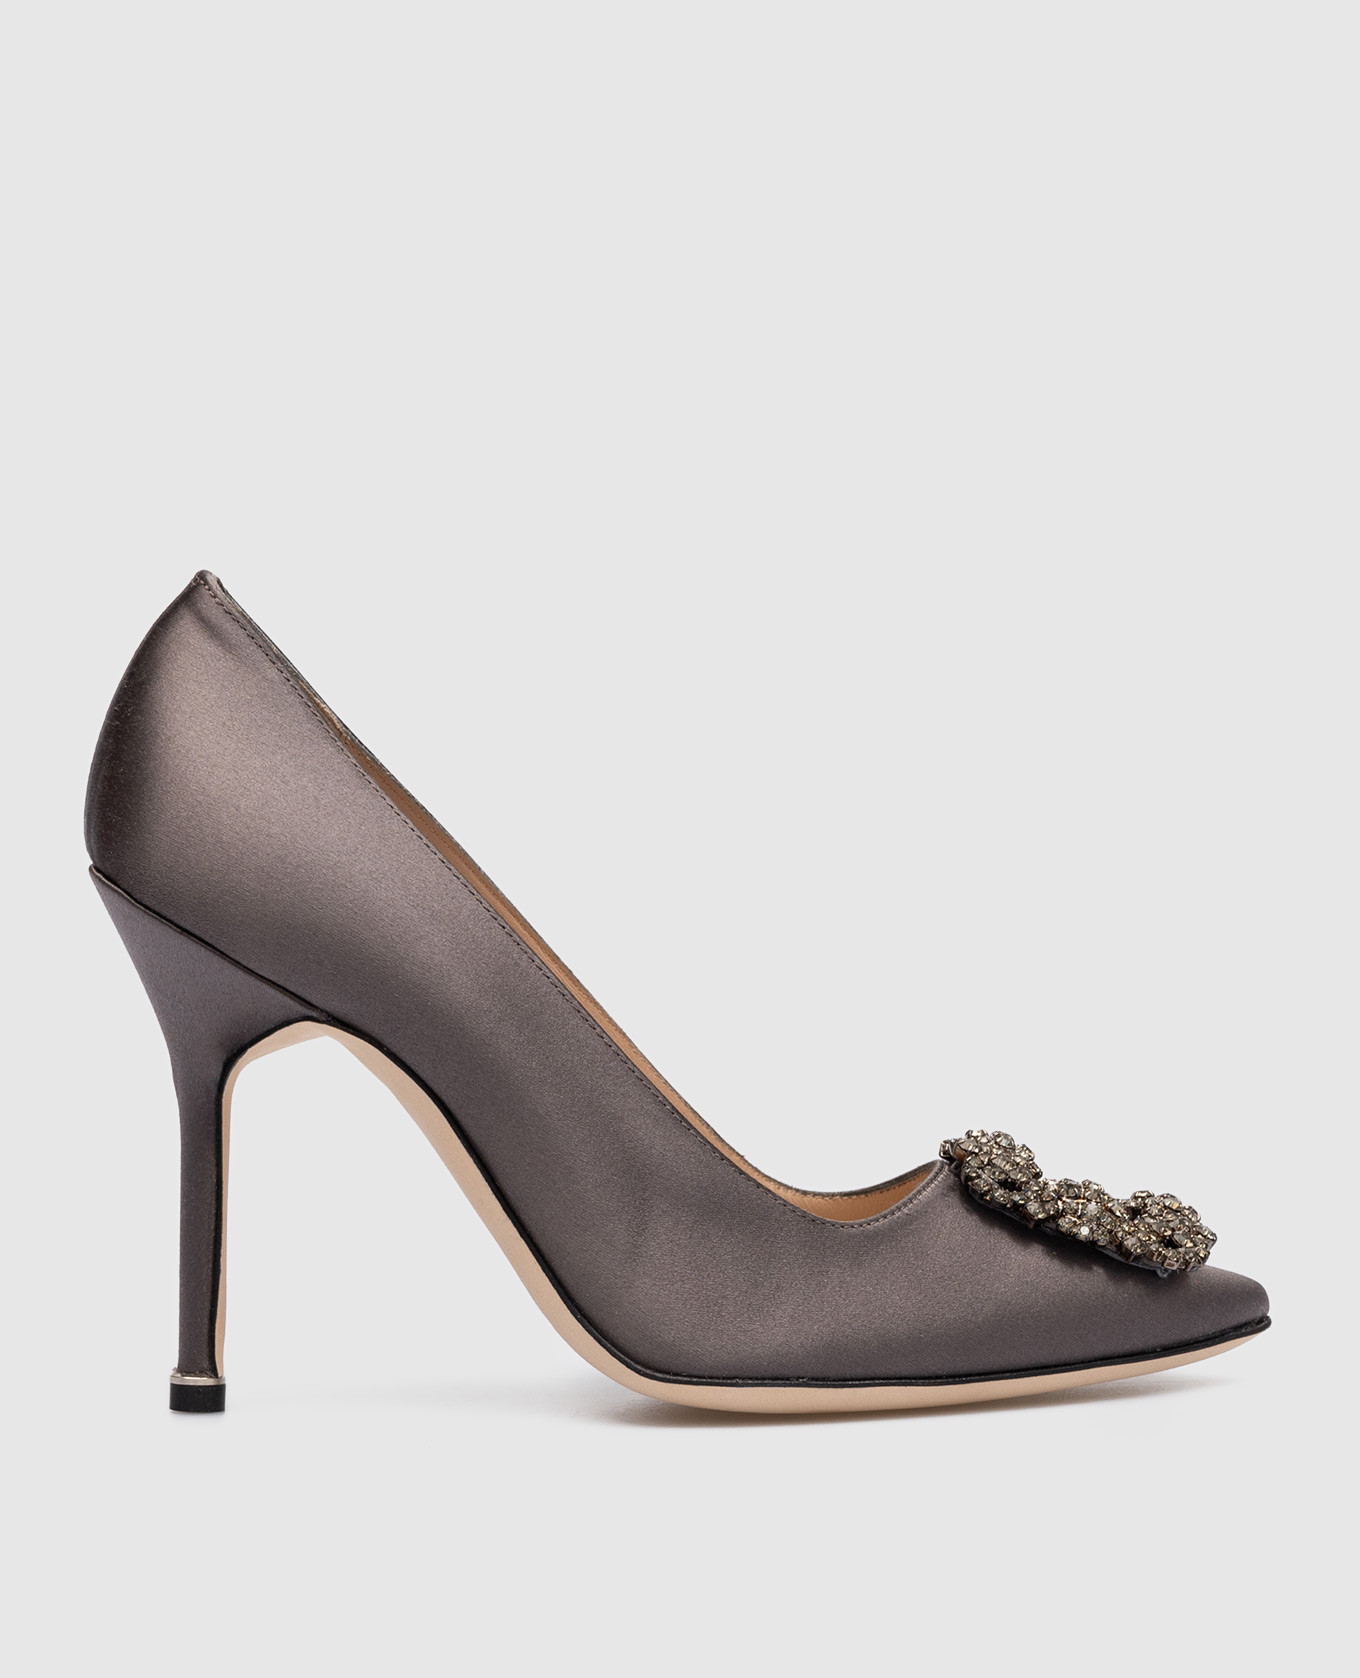 Hangisi gray pumps with crystals